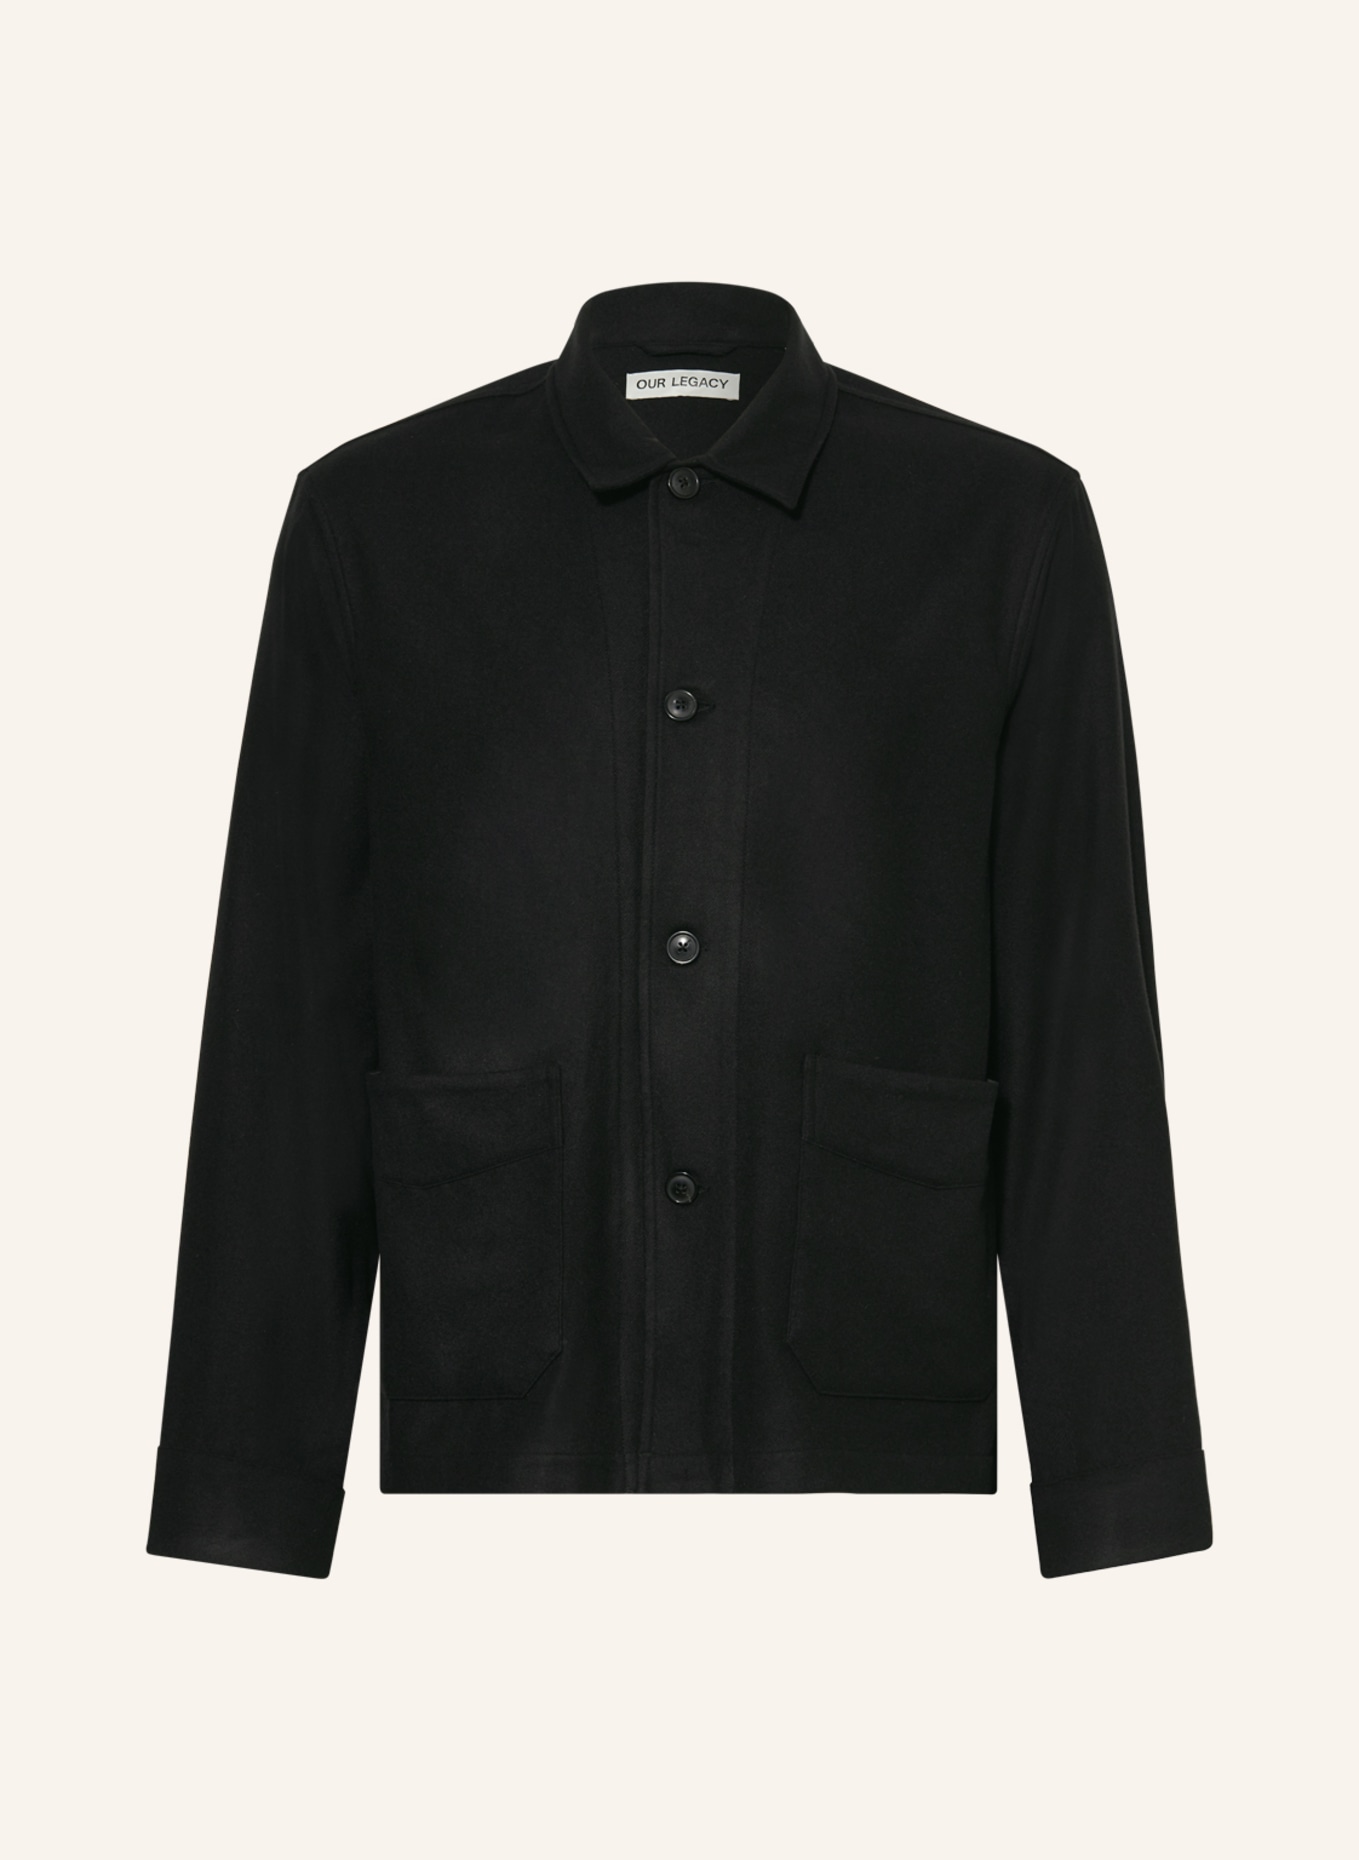 OUR LEGACY Flanell-Overshirt, Farbe: SCHWARZ (Bild 1)